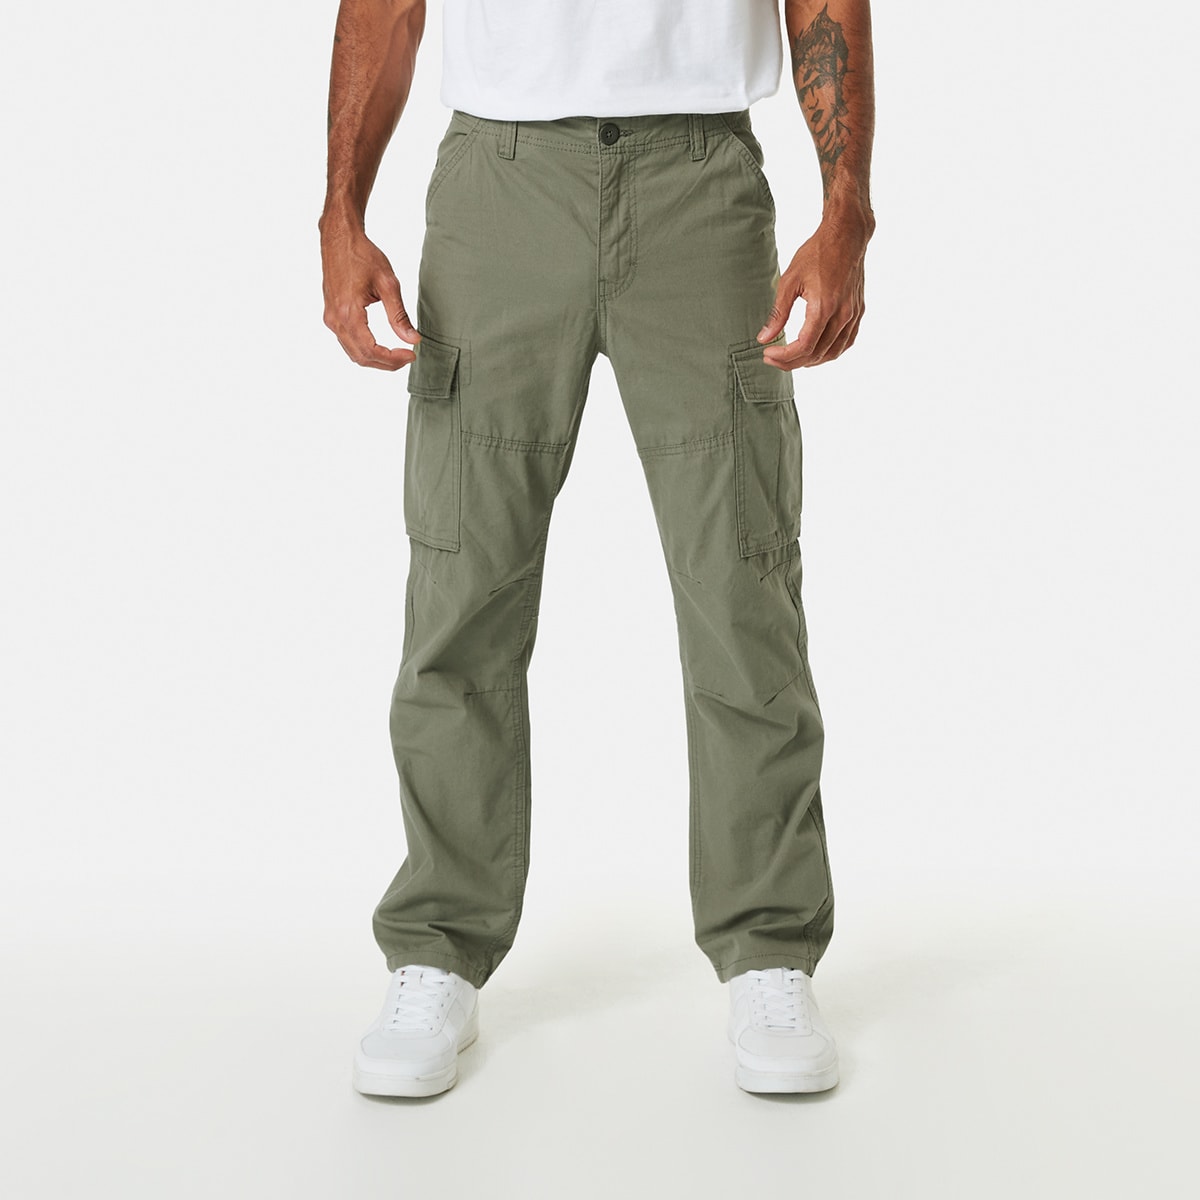 Mens Cargo  Paratrooper Pants  Abercrombie  Fitch